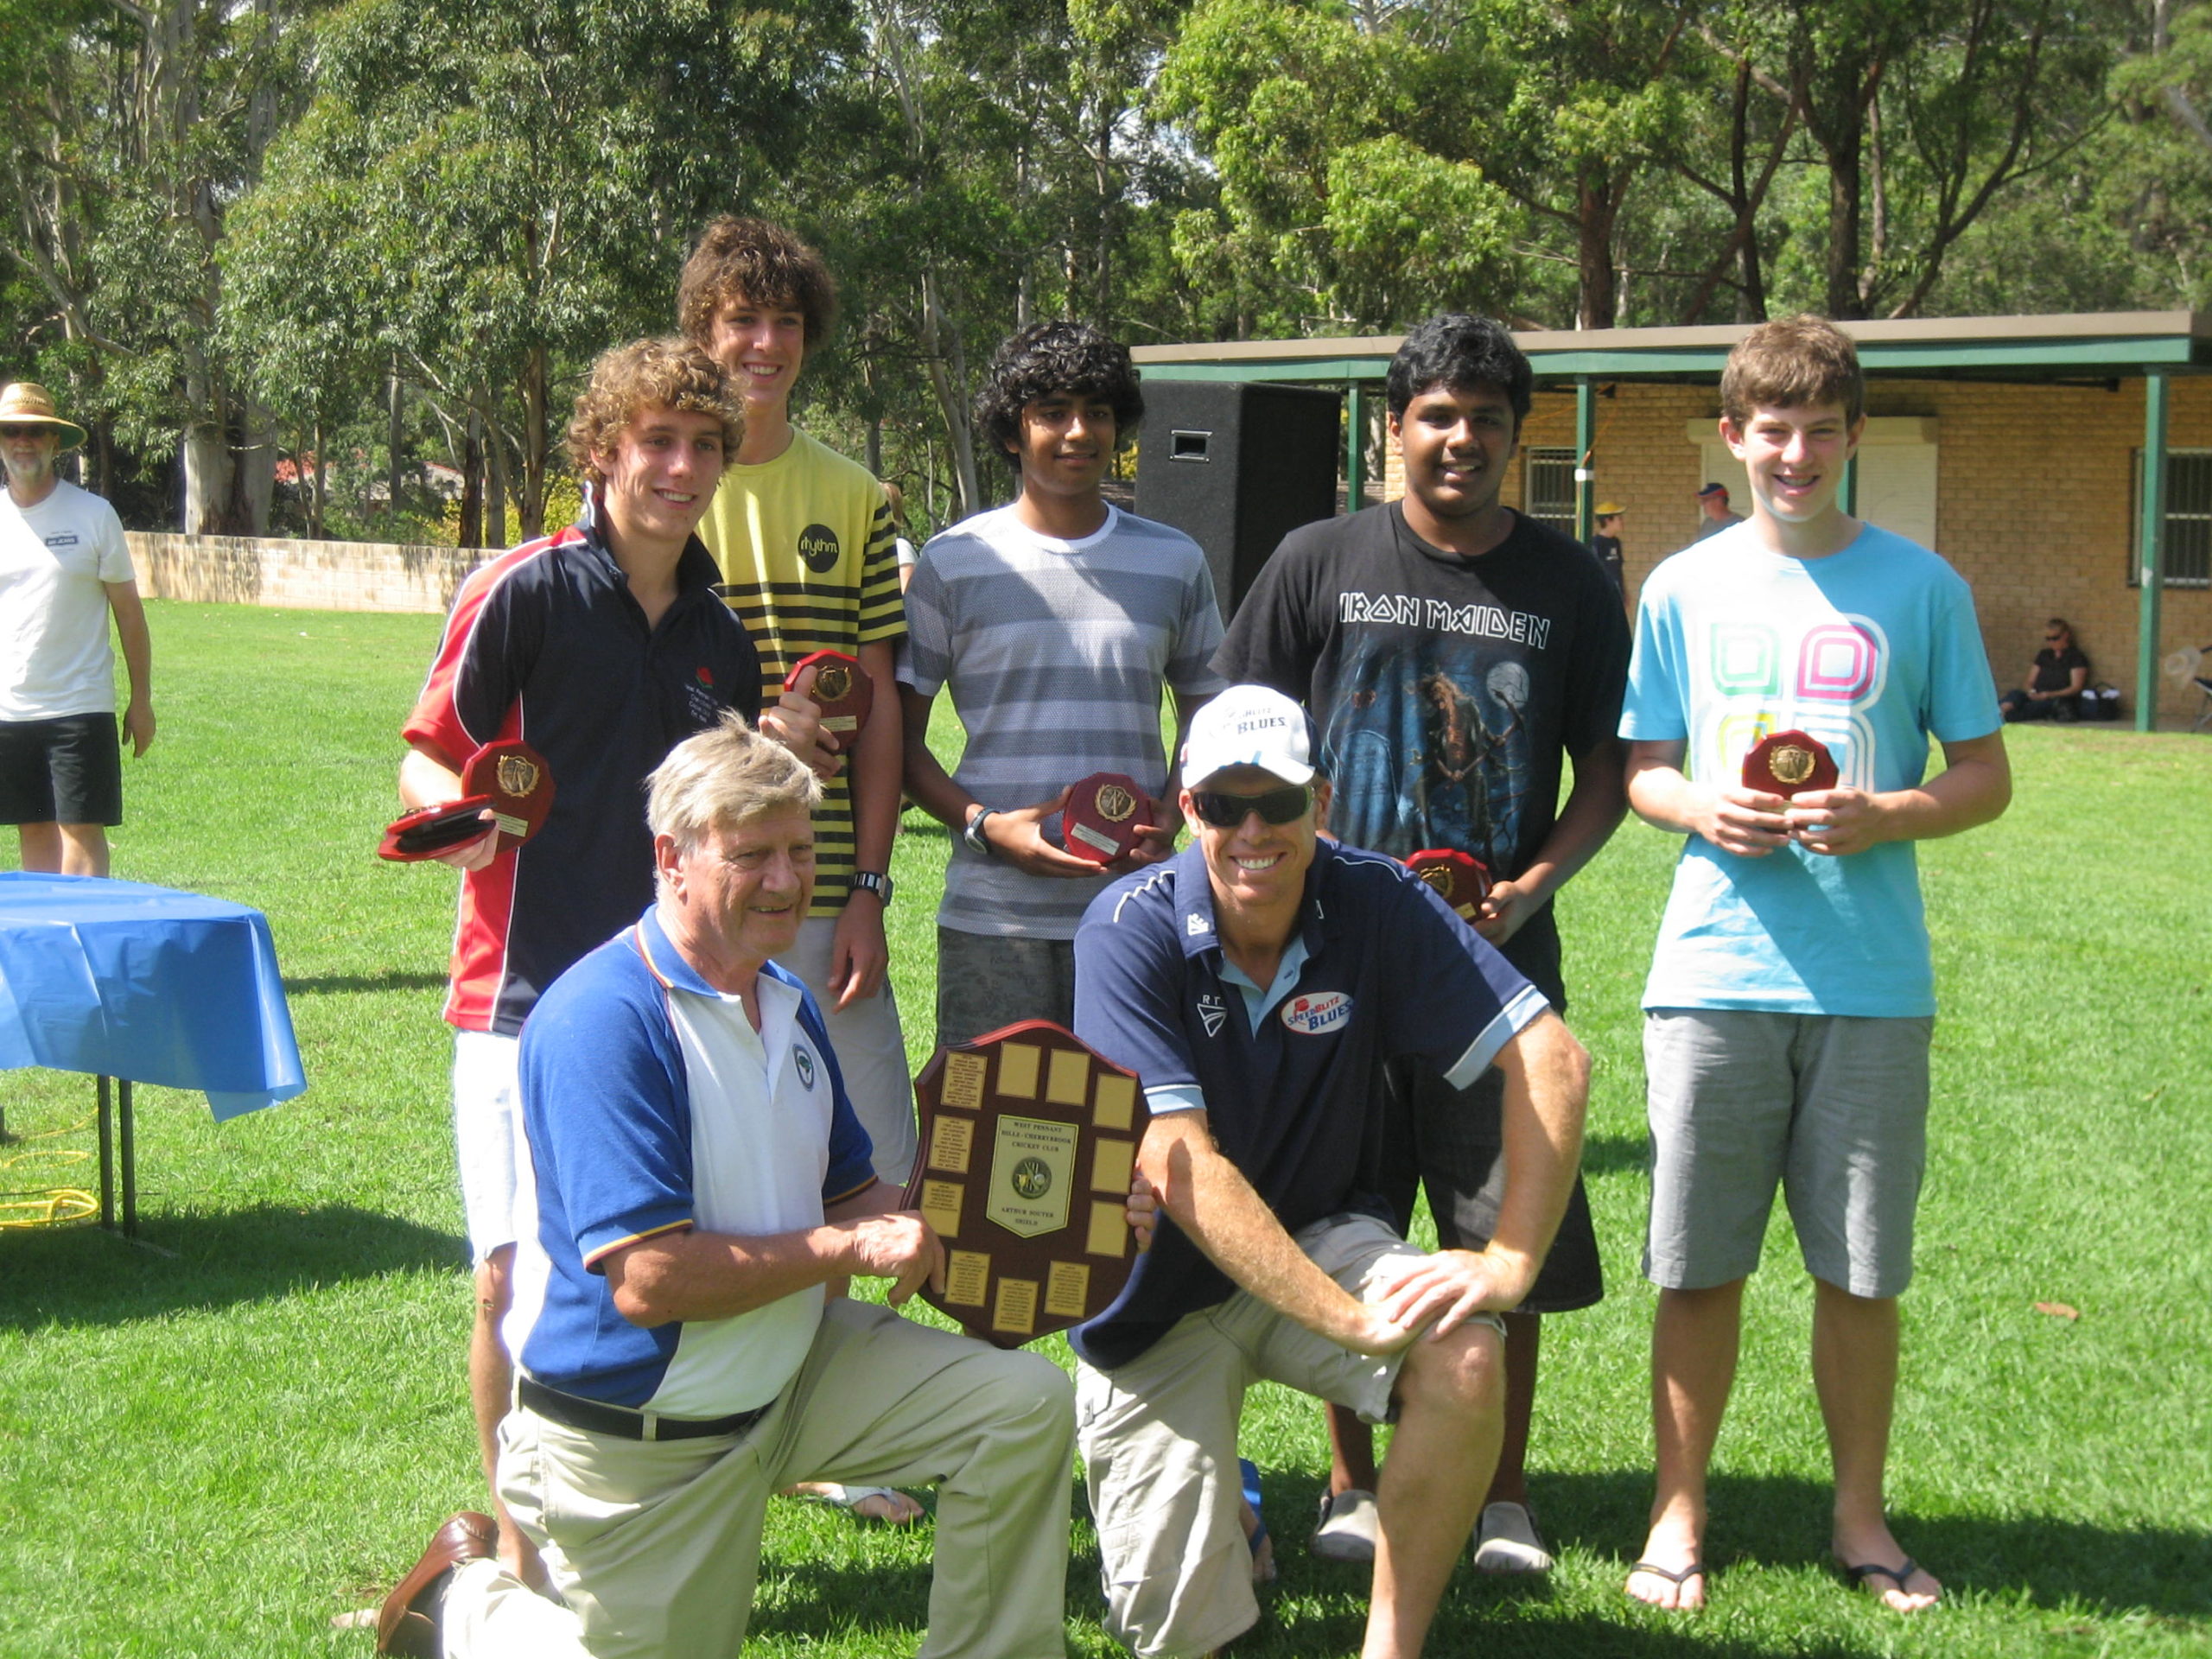 Our Kanga now U16 graduates with Arthur Souter and Dom Thornley @ Campbell Park March 2009